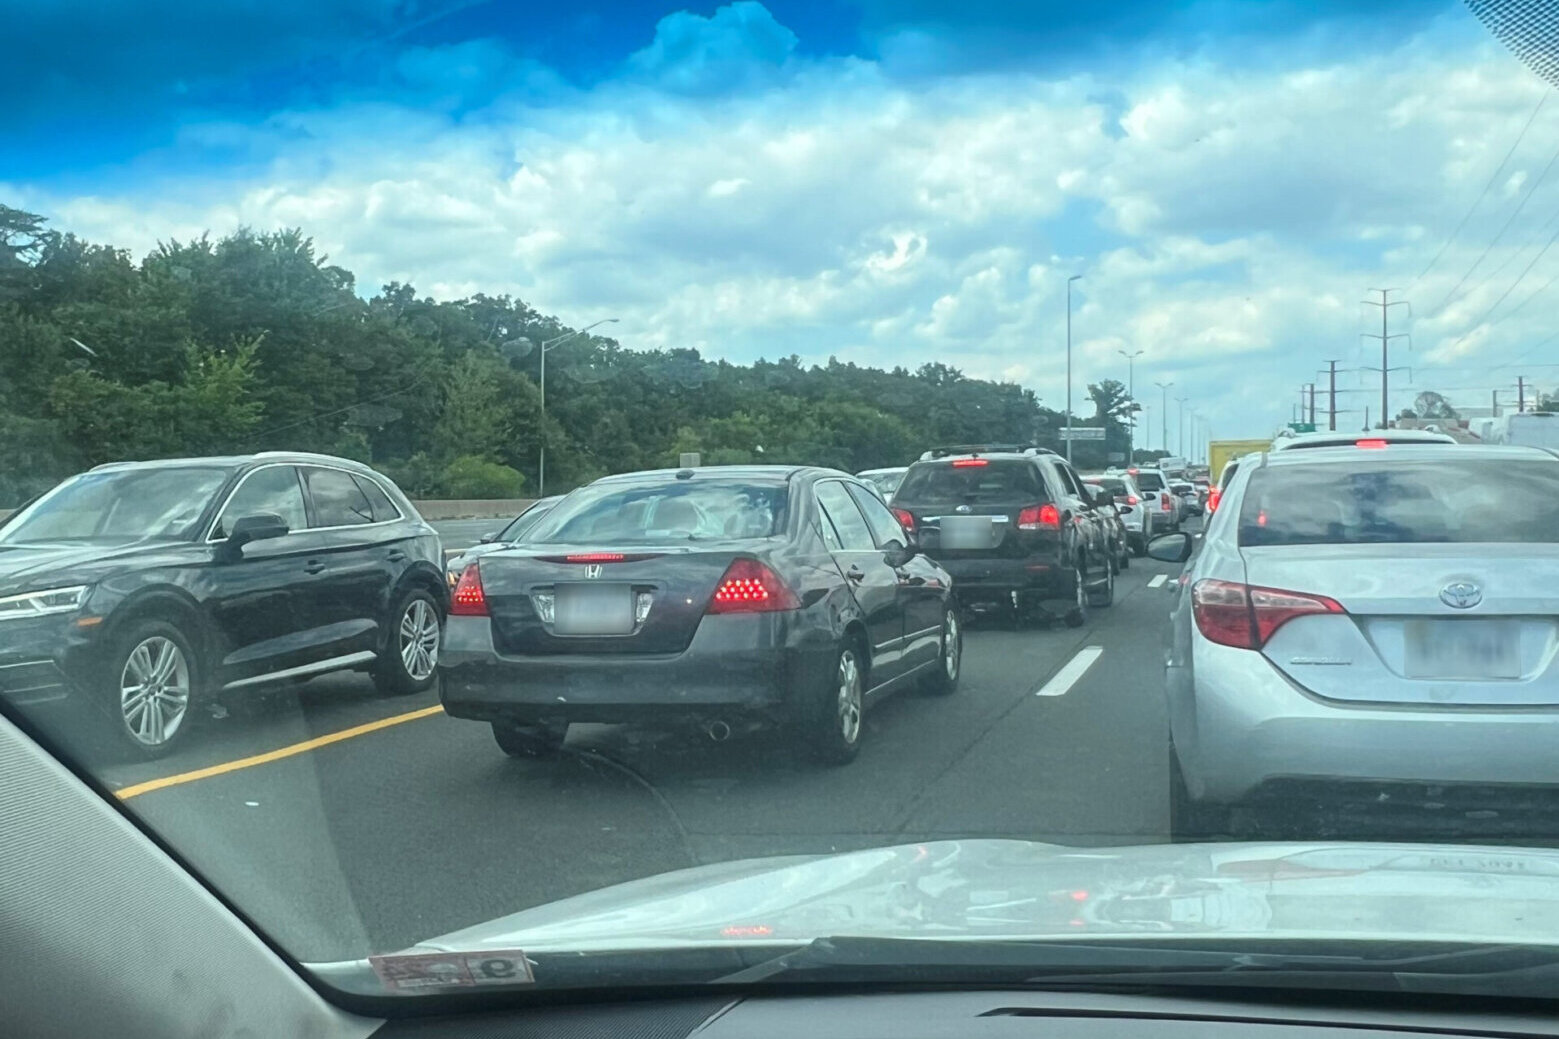 Investigation into fatal motorcycle crash closes Route 28 near Dulles – WTOP